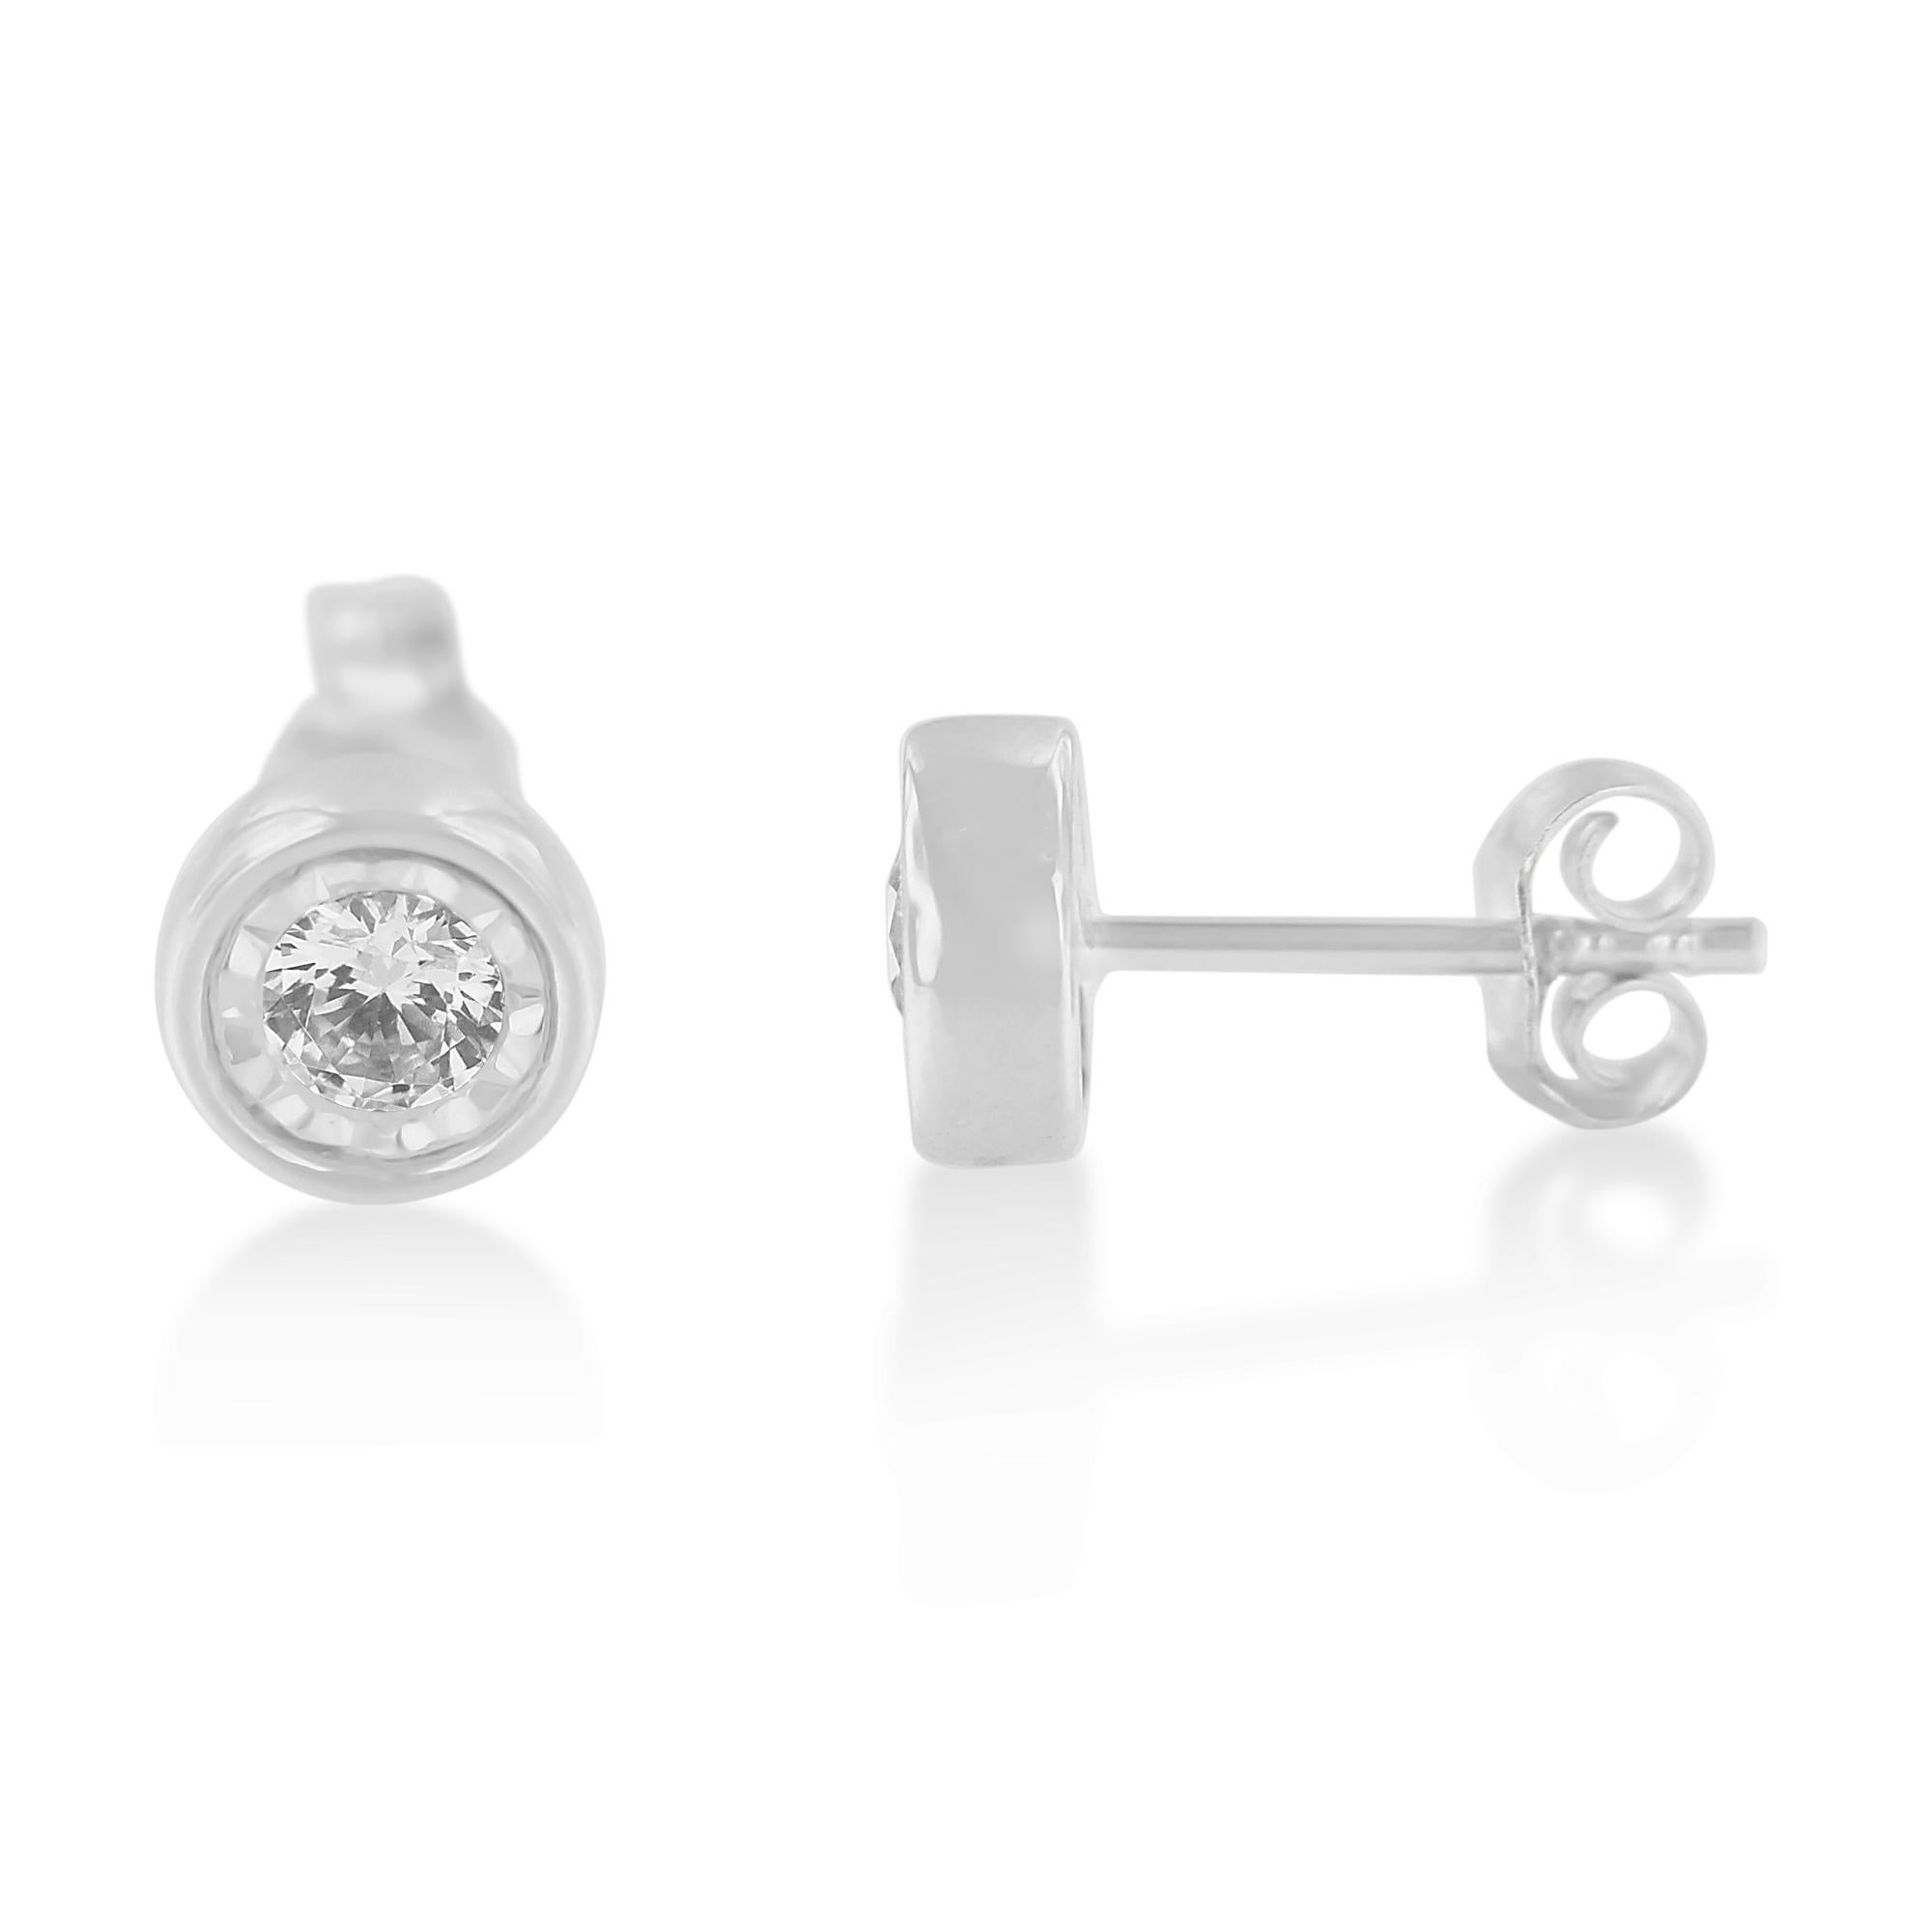 Add a touch of elegance to your everyday outfits with this stunning pair of diamond stud earrings. Made in a bezel design, this piece is made from the finest 10k white gold and is embellished with 2 round-cut diamonds in a miracle setting. The total